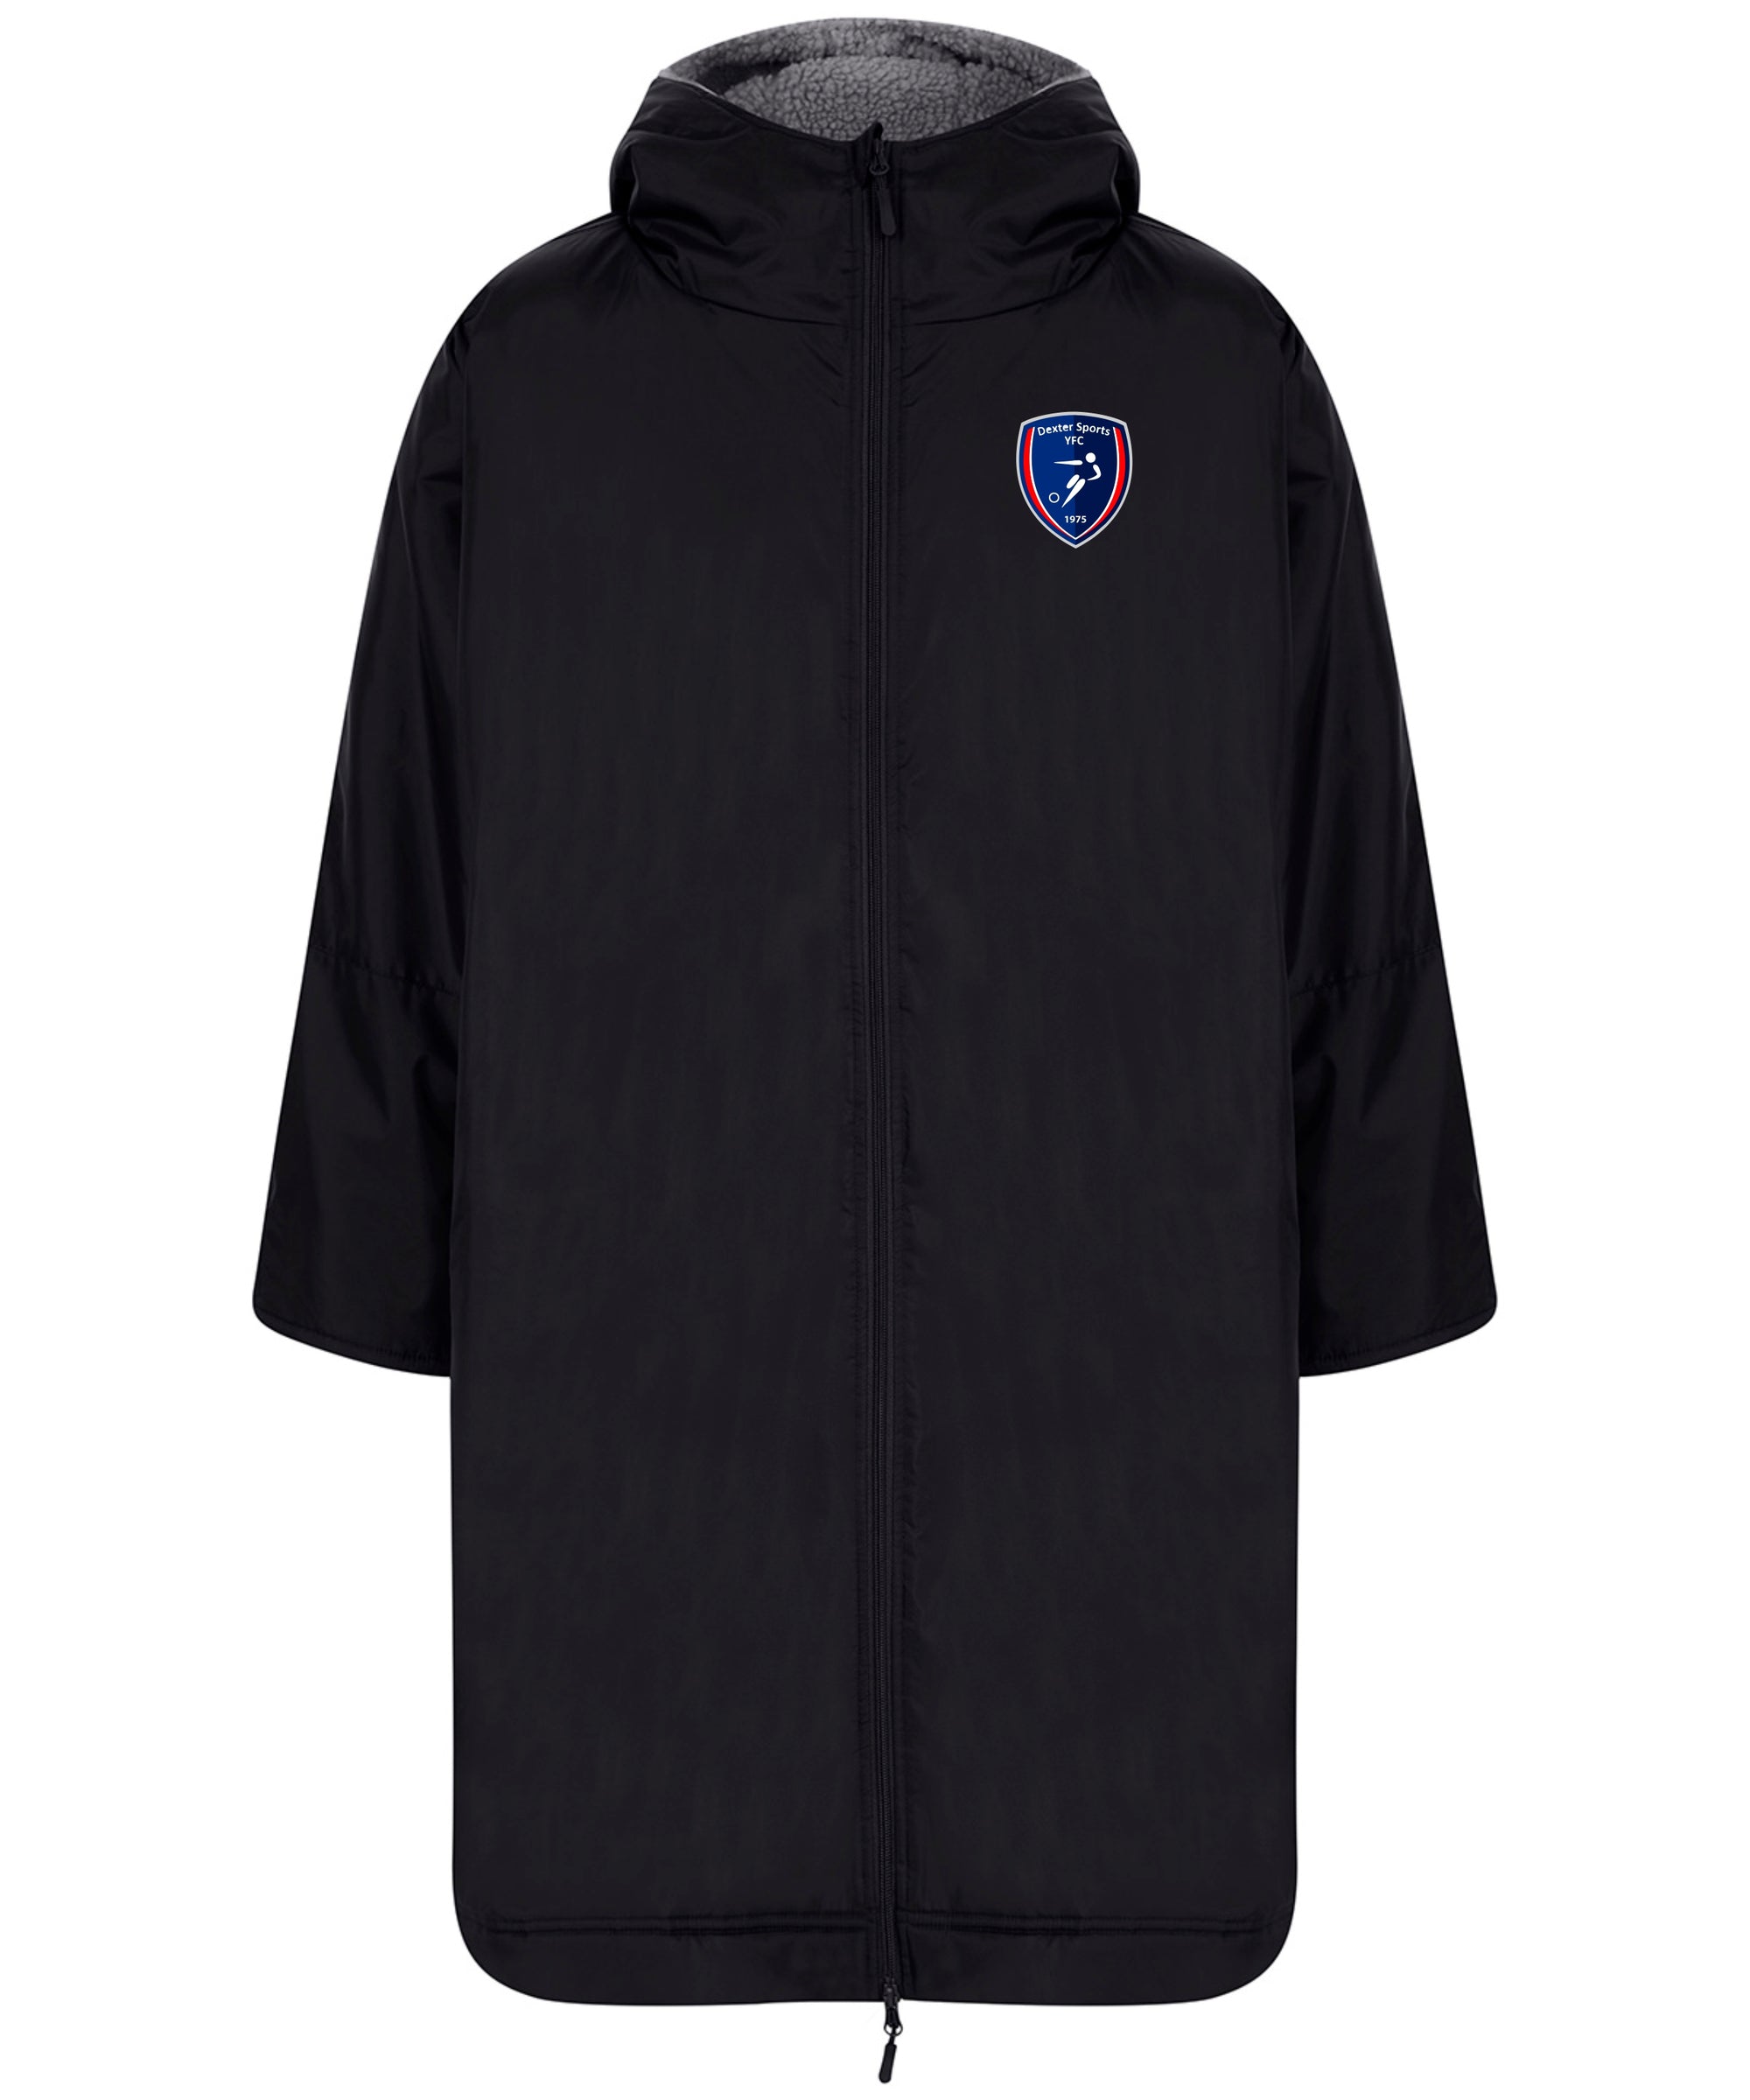 Dexters Supporters - All Weather Dry Robe